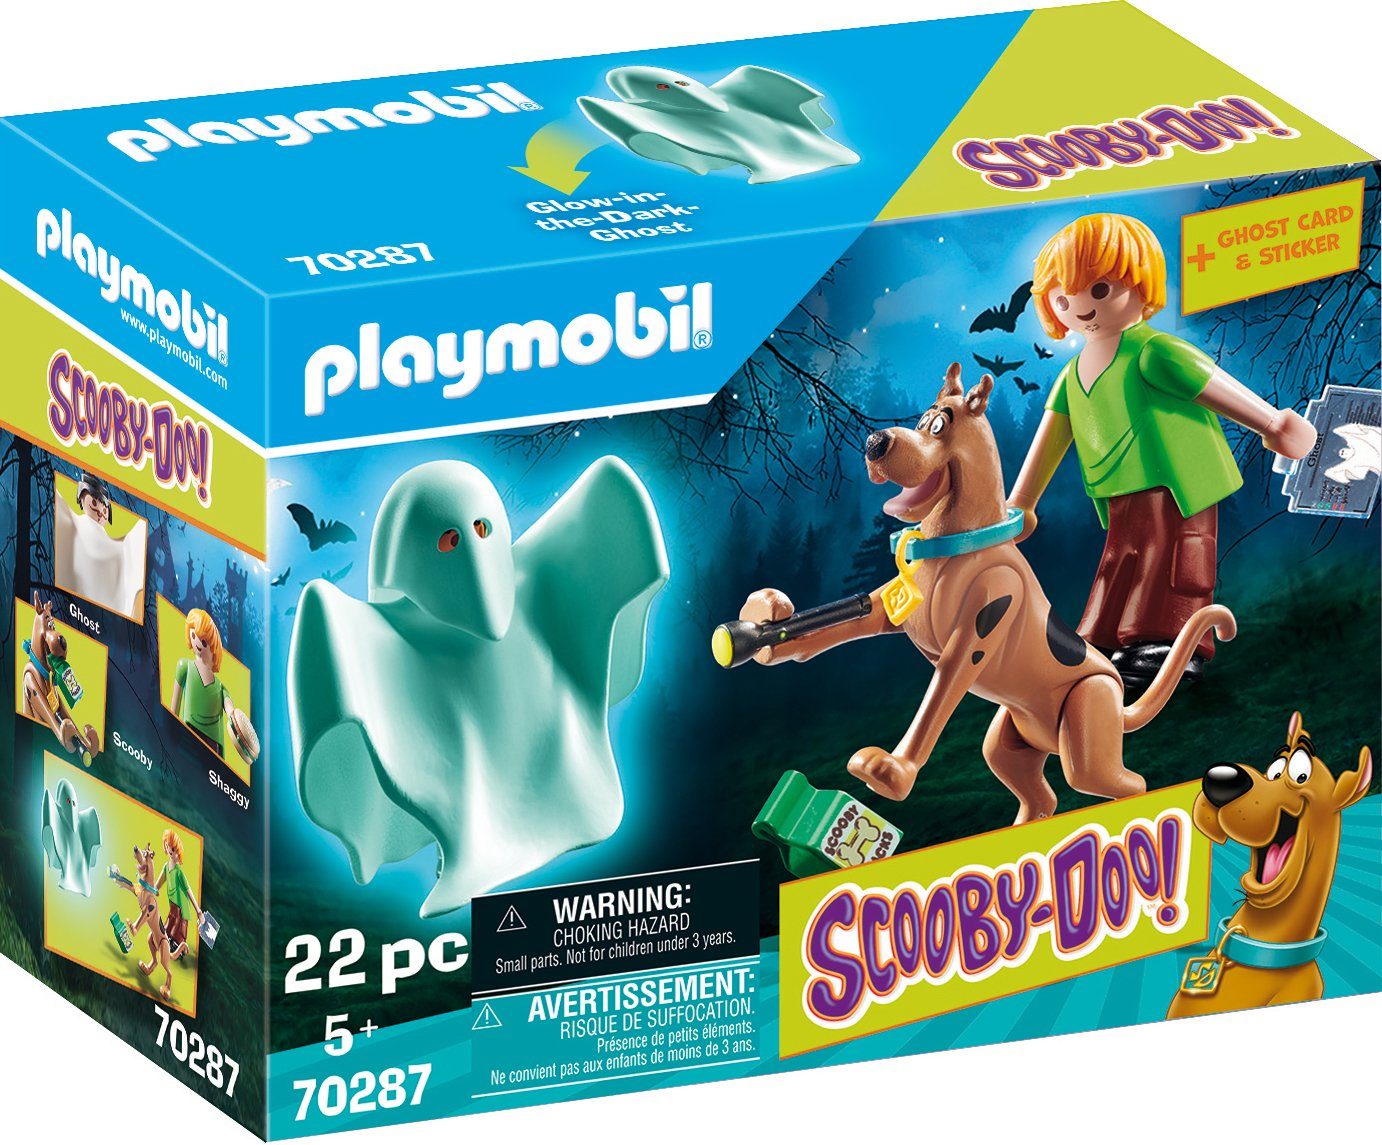 Playmobil® Konstruktions-Spielset Scooby & Shaggy mit Geist (70287), SCOOBY-DOO!, (22 St), Made in Europe